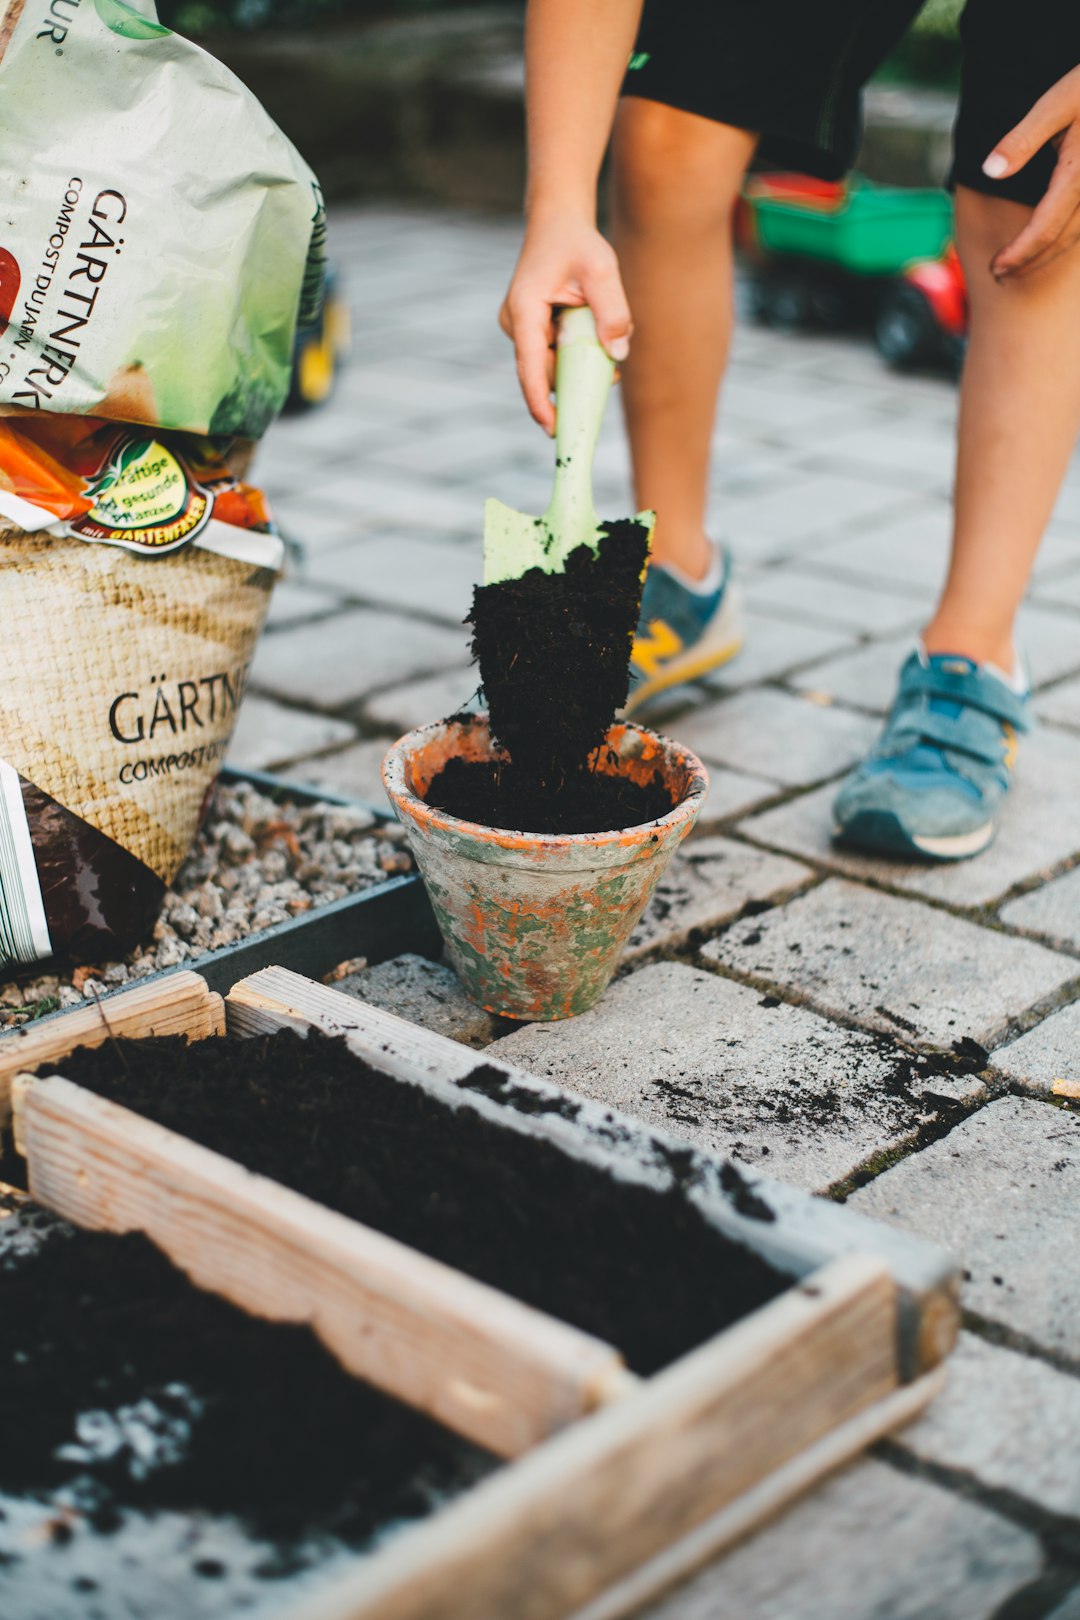 7 Tips For Successful Gardening: A Guide For Beginners